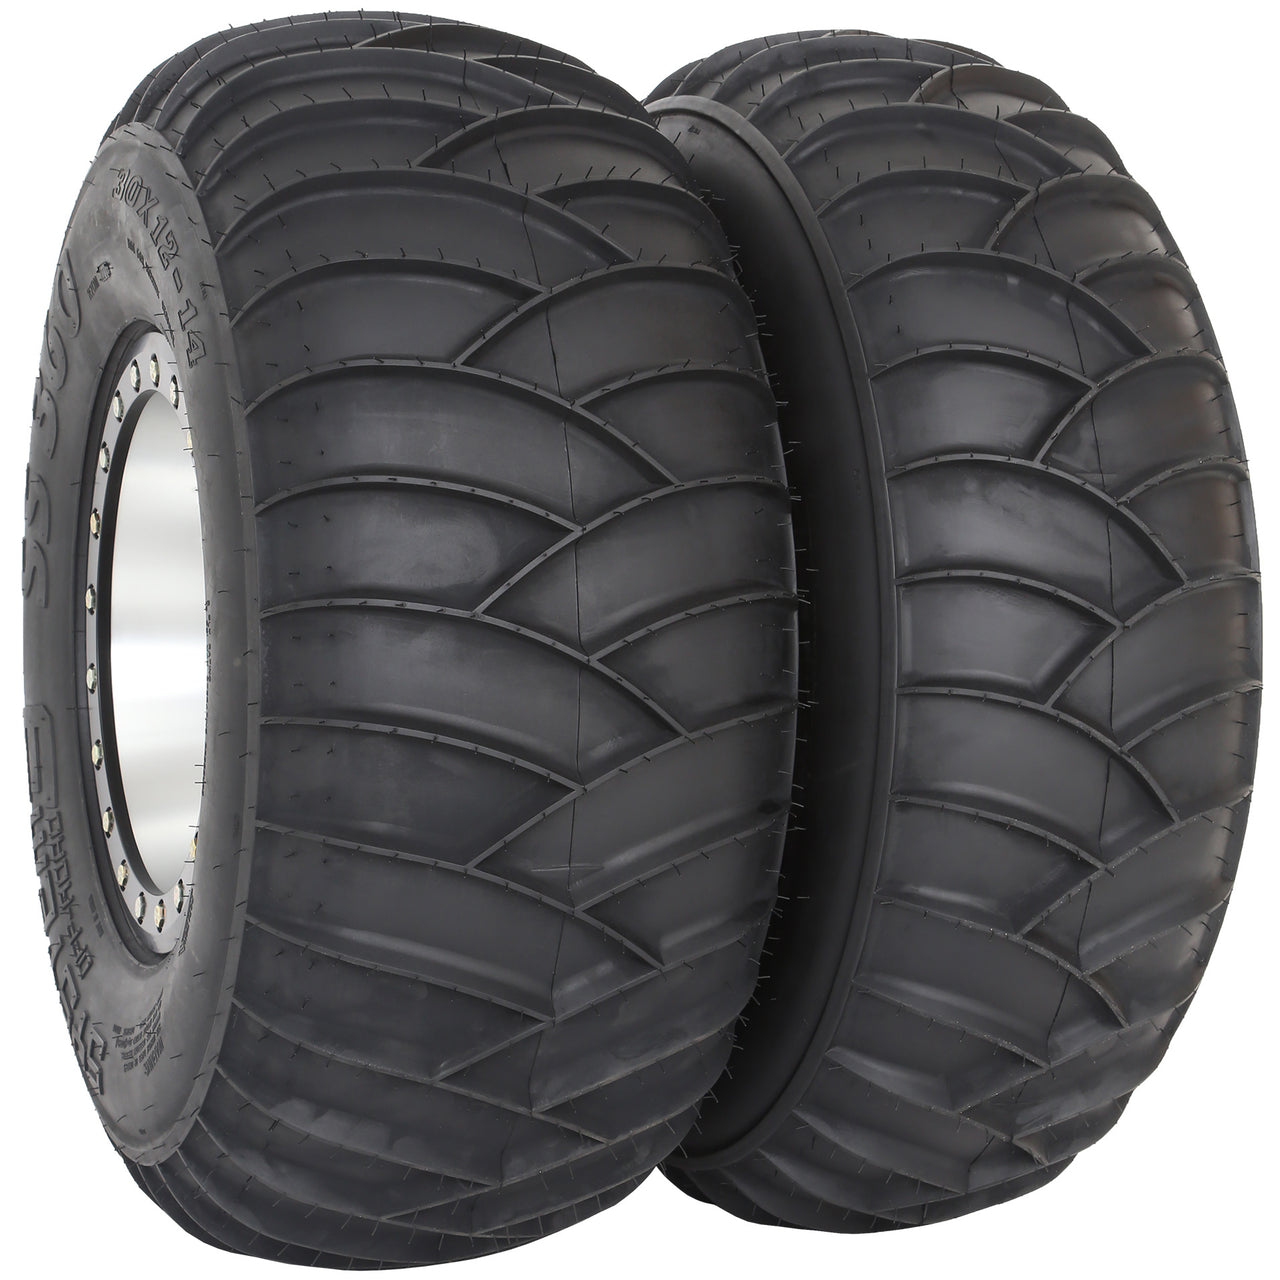 System 3 Off-Road SS360 Sand Tires